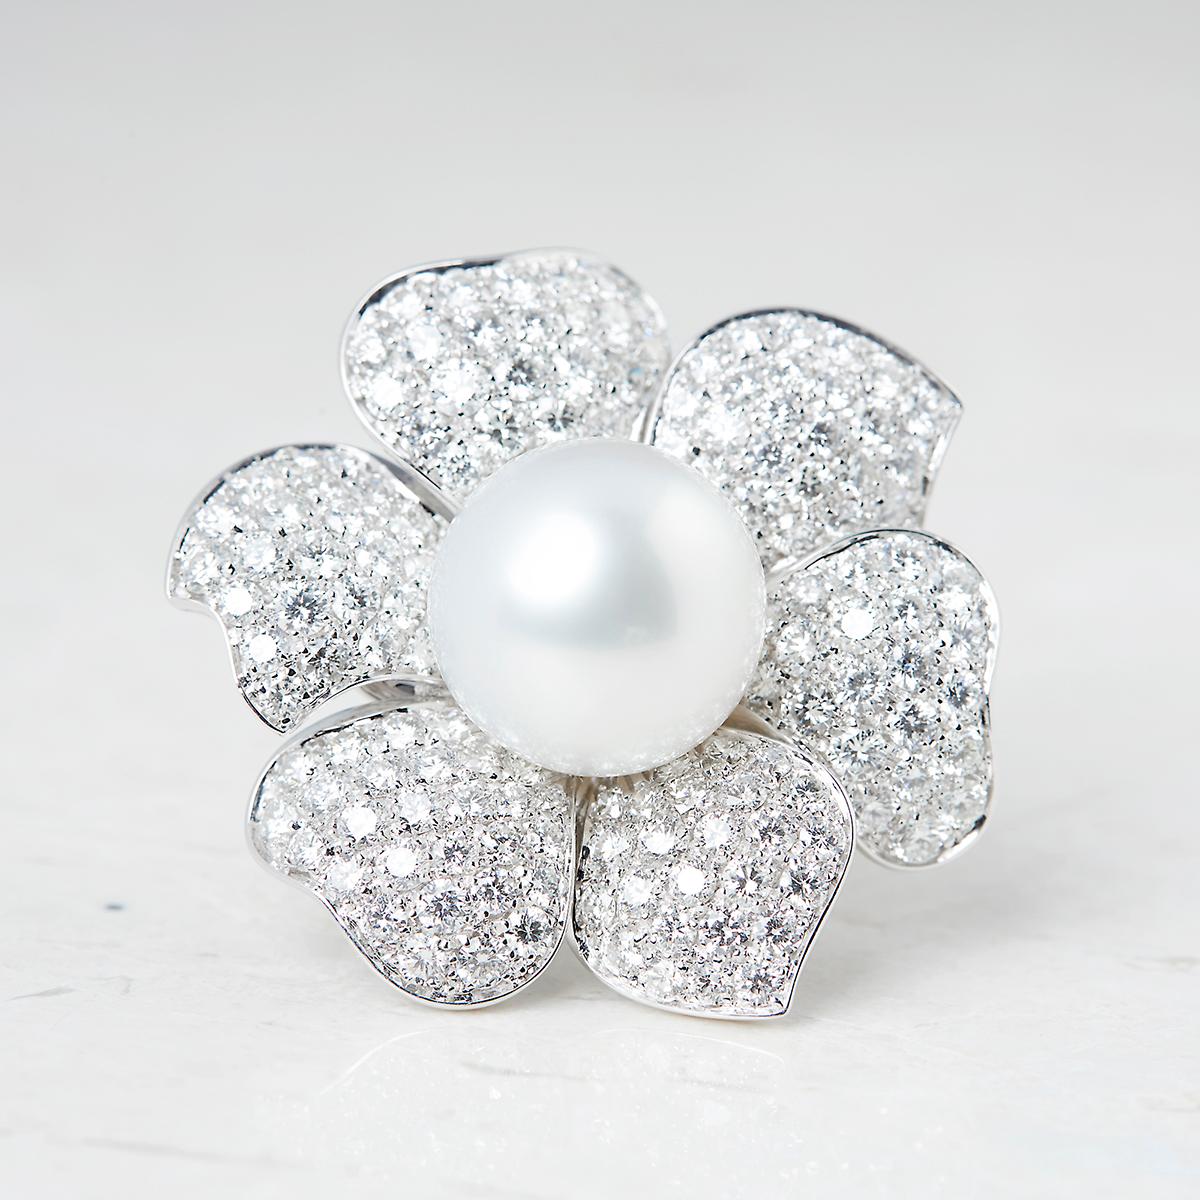 Xupes Code: J284
Brand: Picchiotti
Description: 18k White Gold South Sea Pearl & 7.80ct Diamond Flower Ring
Accompanied With: Xupes Presentation Box
Gender: Ladies
UK Ring Size: L 1/2
EU Ring Size: 52
US Ring Size: 6
Resizing Possible?: YES
Band